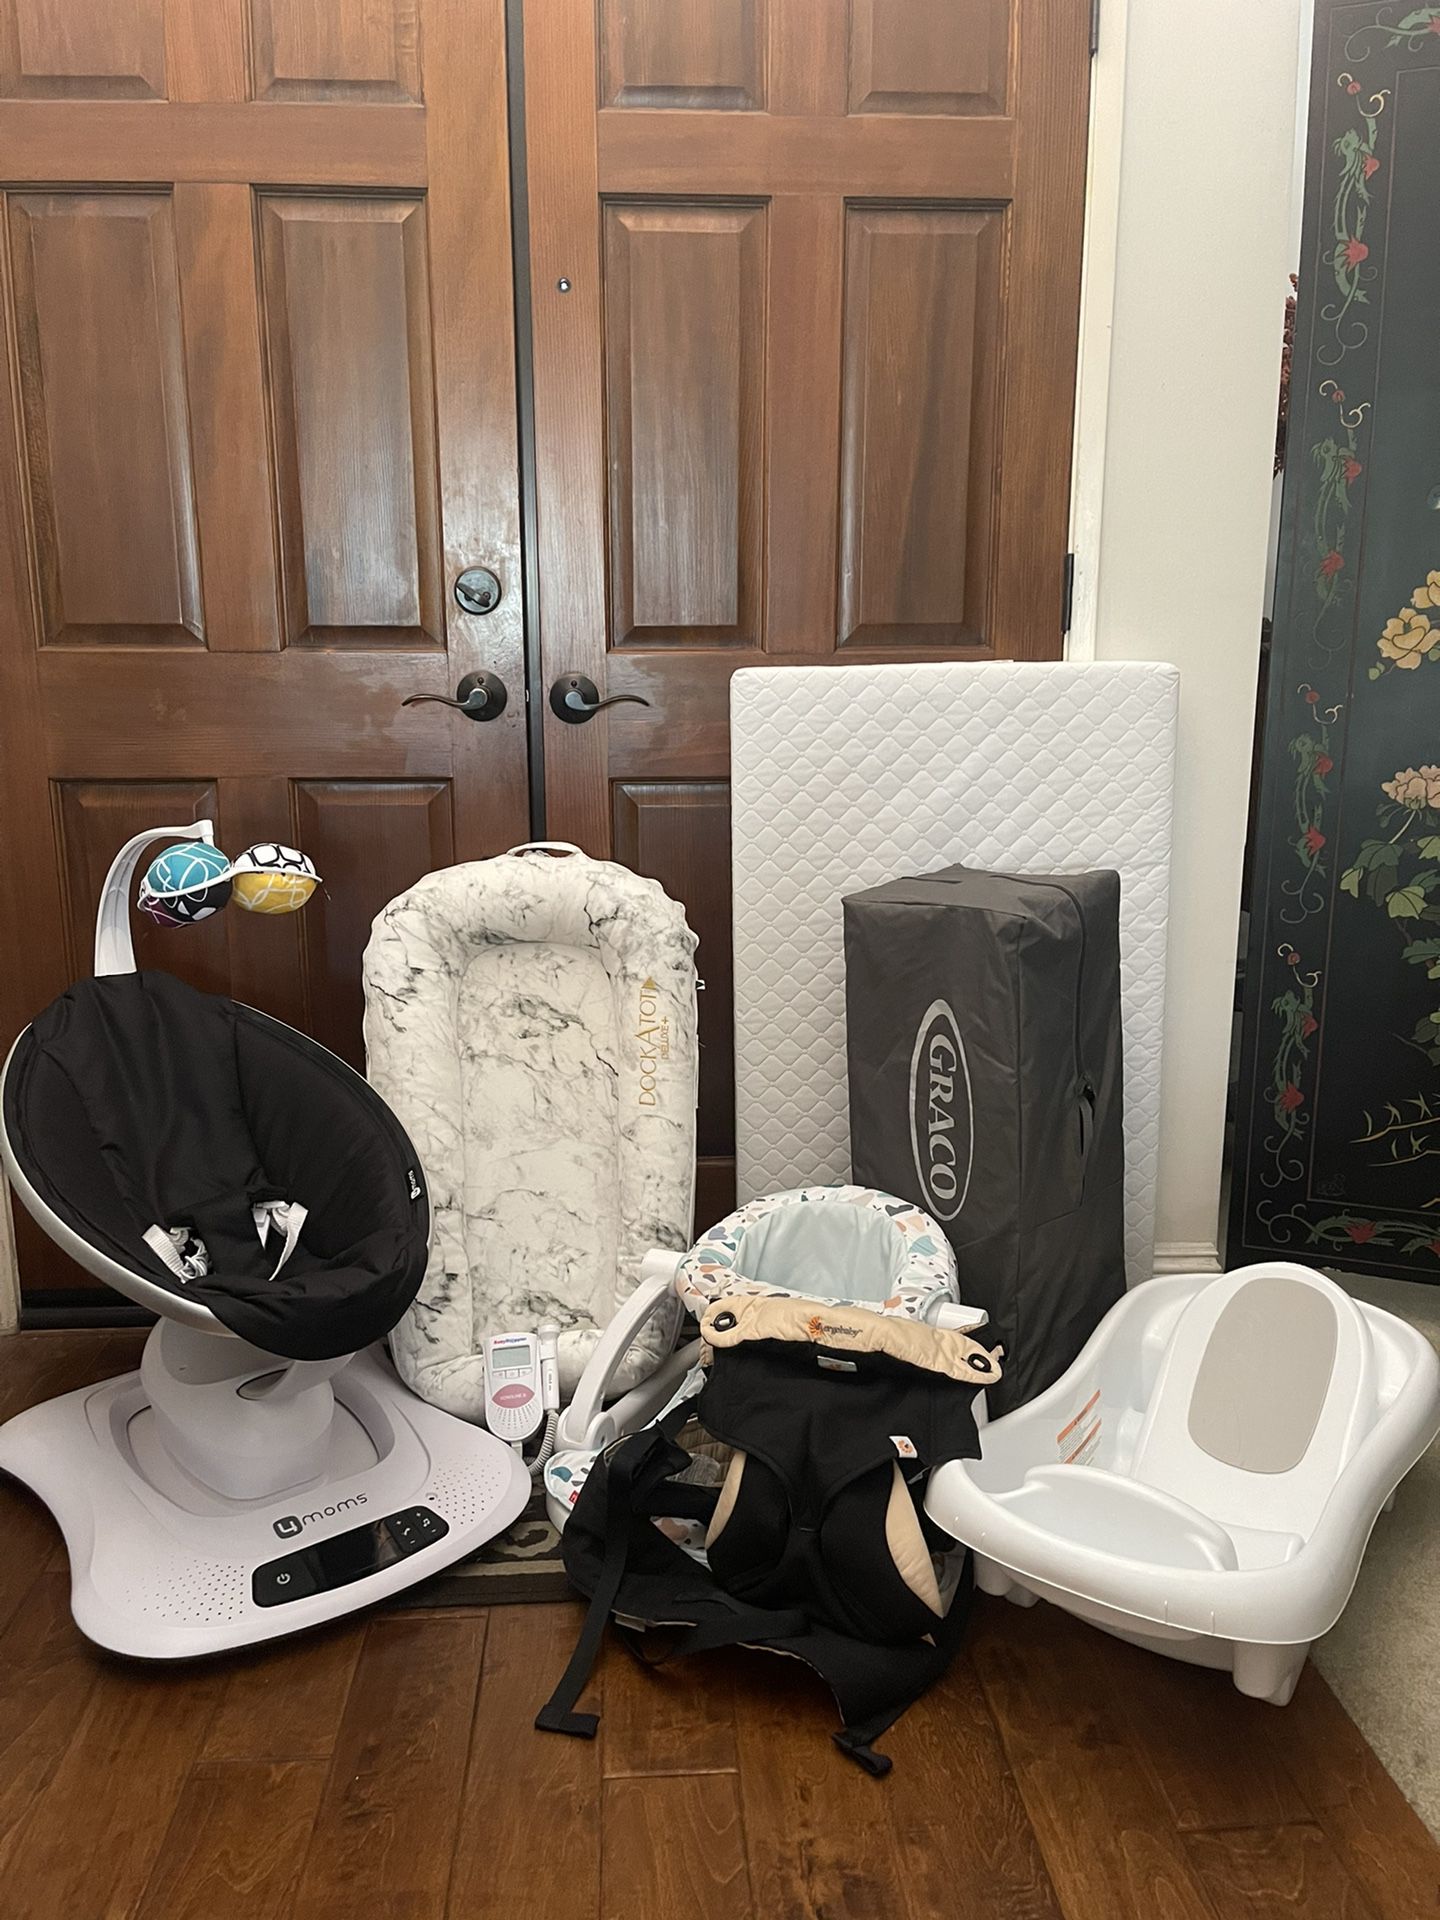 The Ultimate Baby Starter Pack! MamaRoo, DockATot, Ergobaby, Graco (LIKE NEW CONDITION! OVER $850 VALUE COMBINED!)